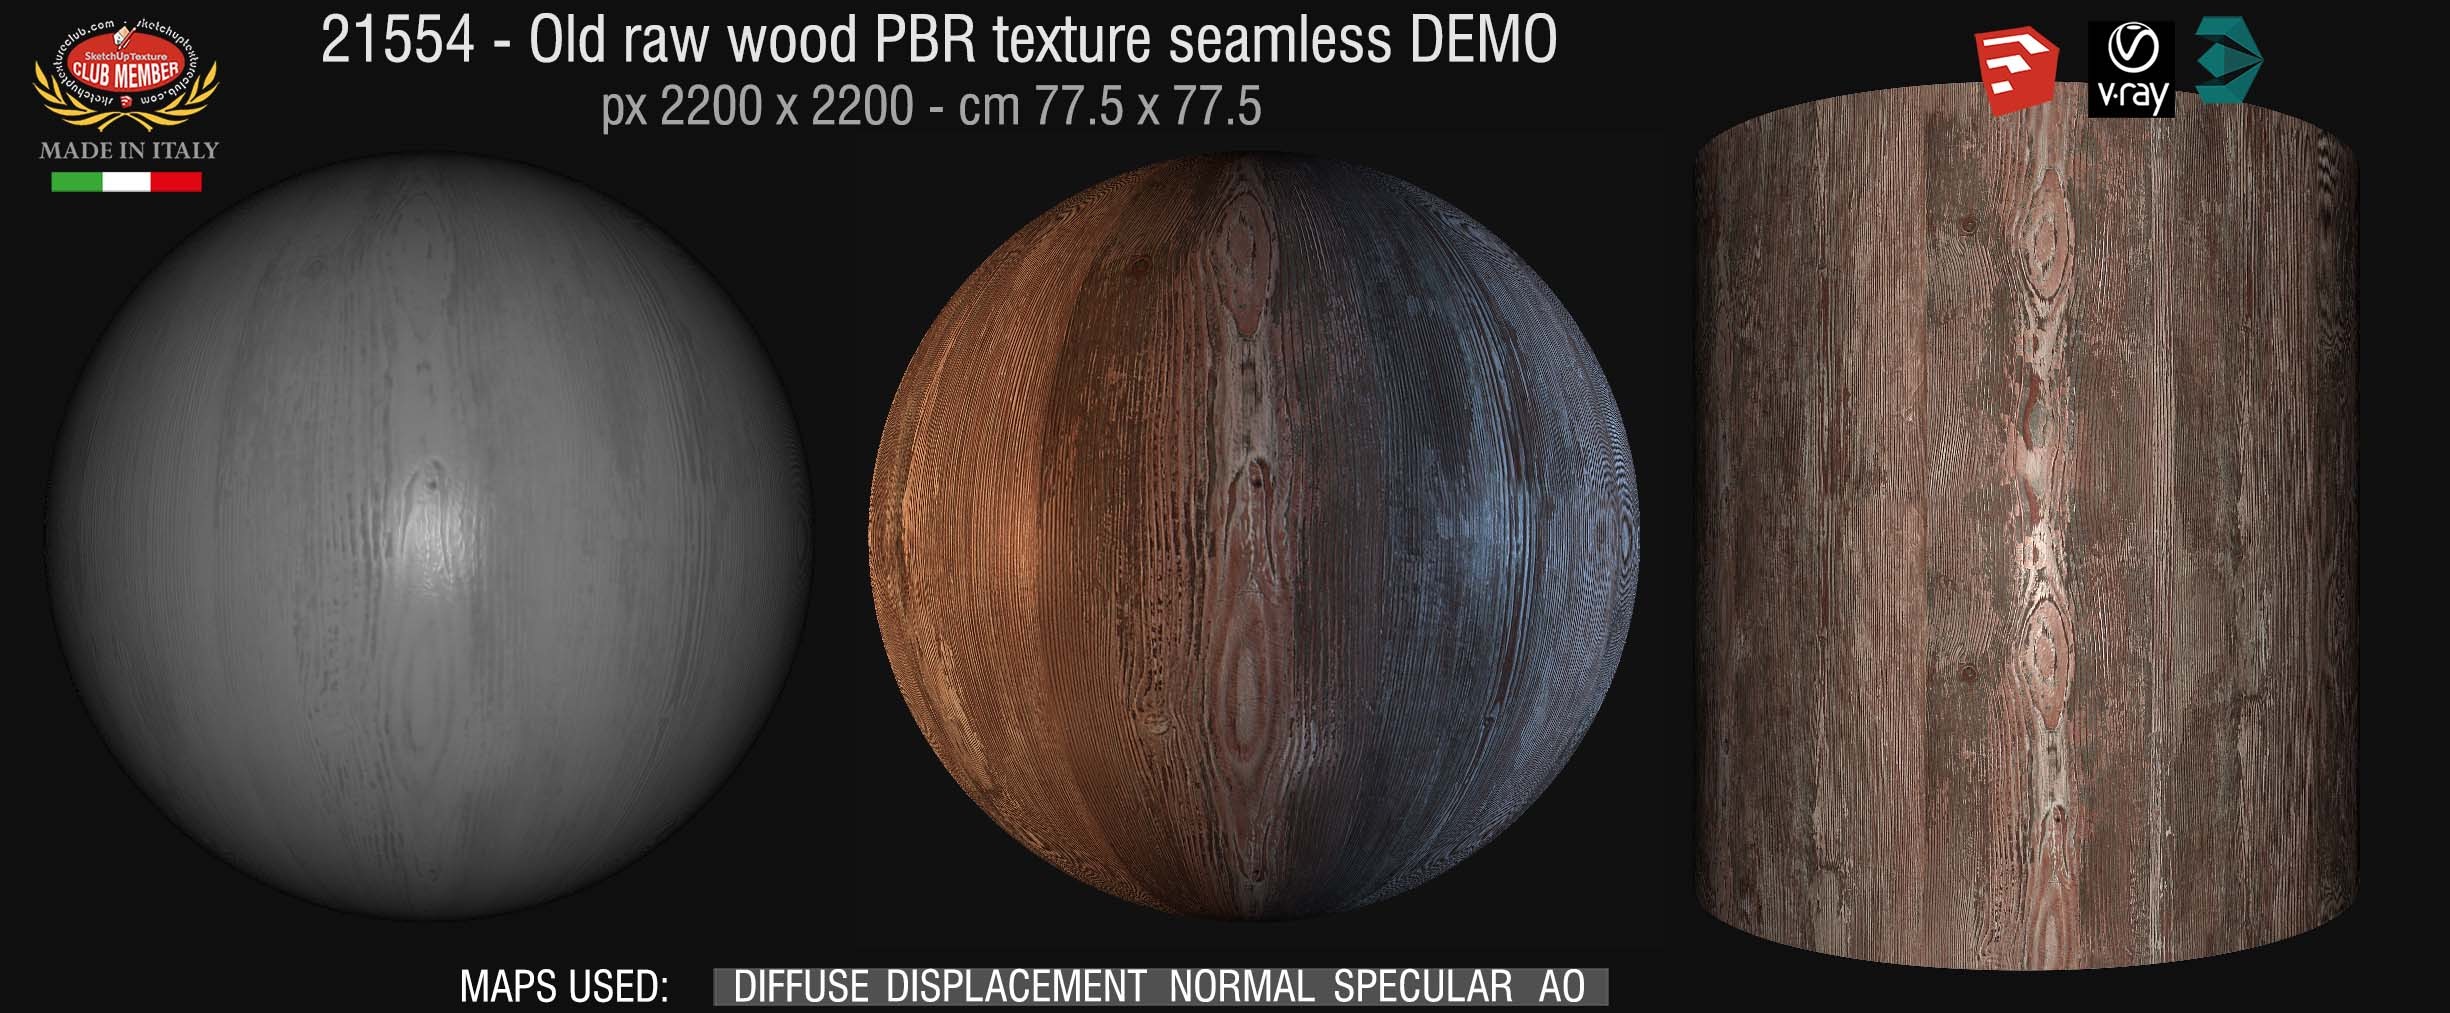 21554 Old raw wood PBR texture seamless DEMO